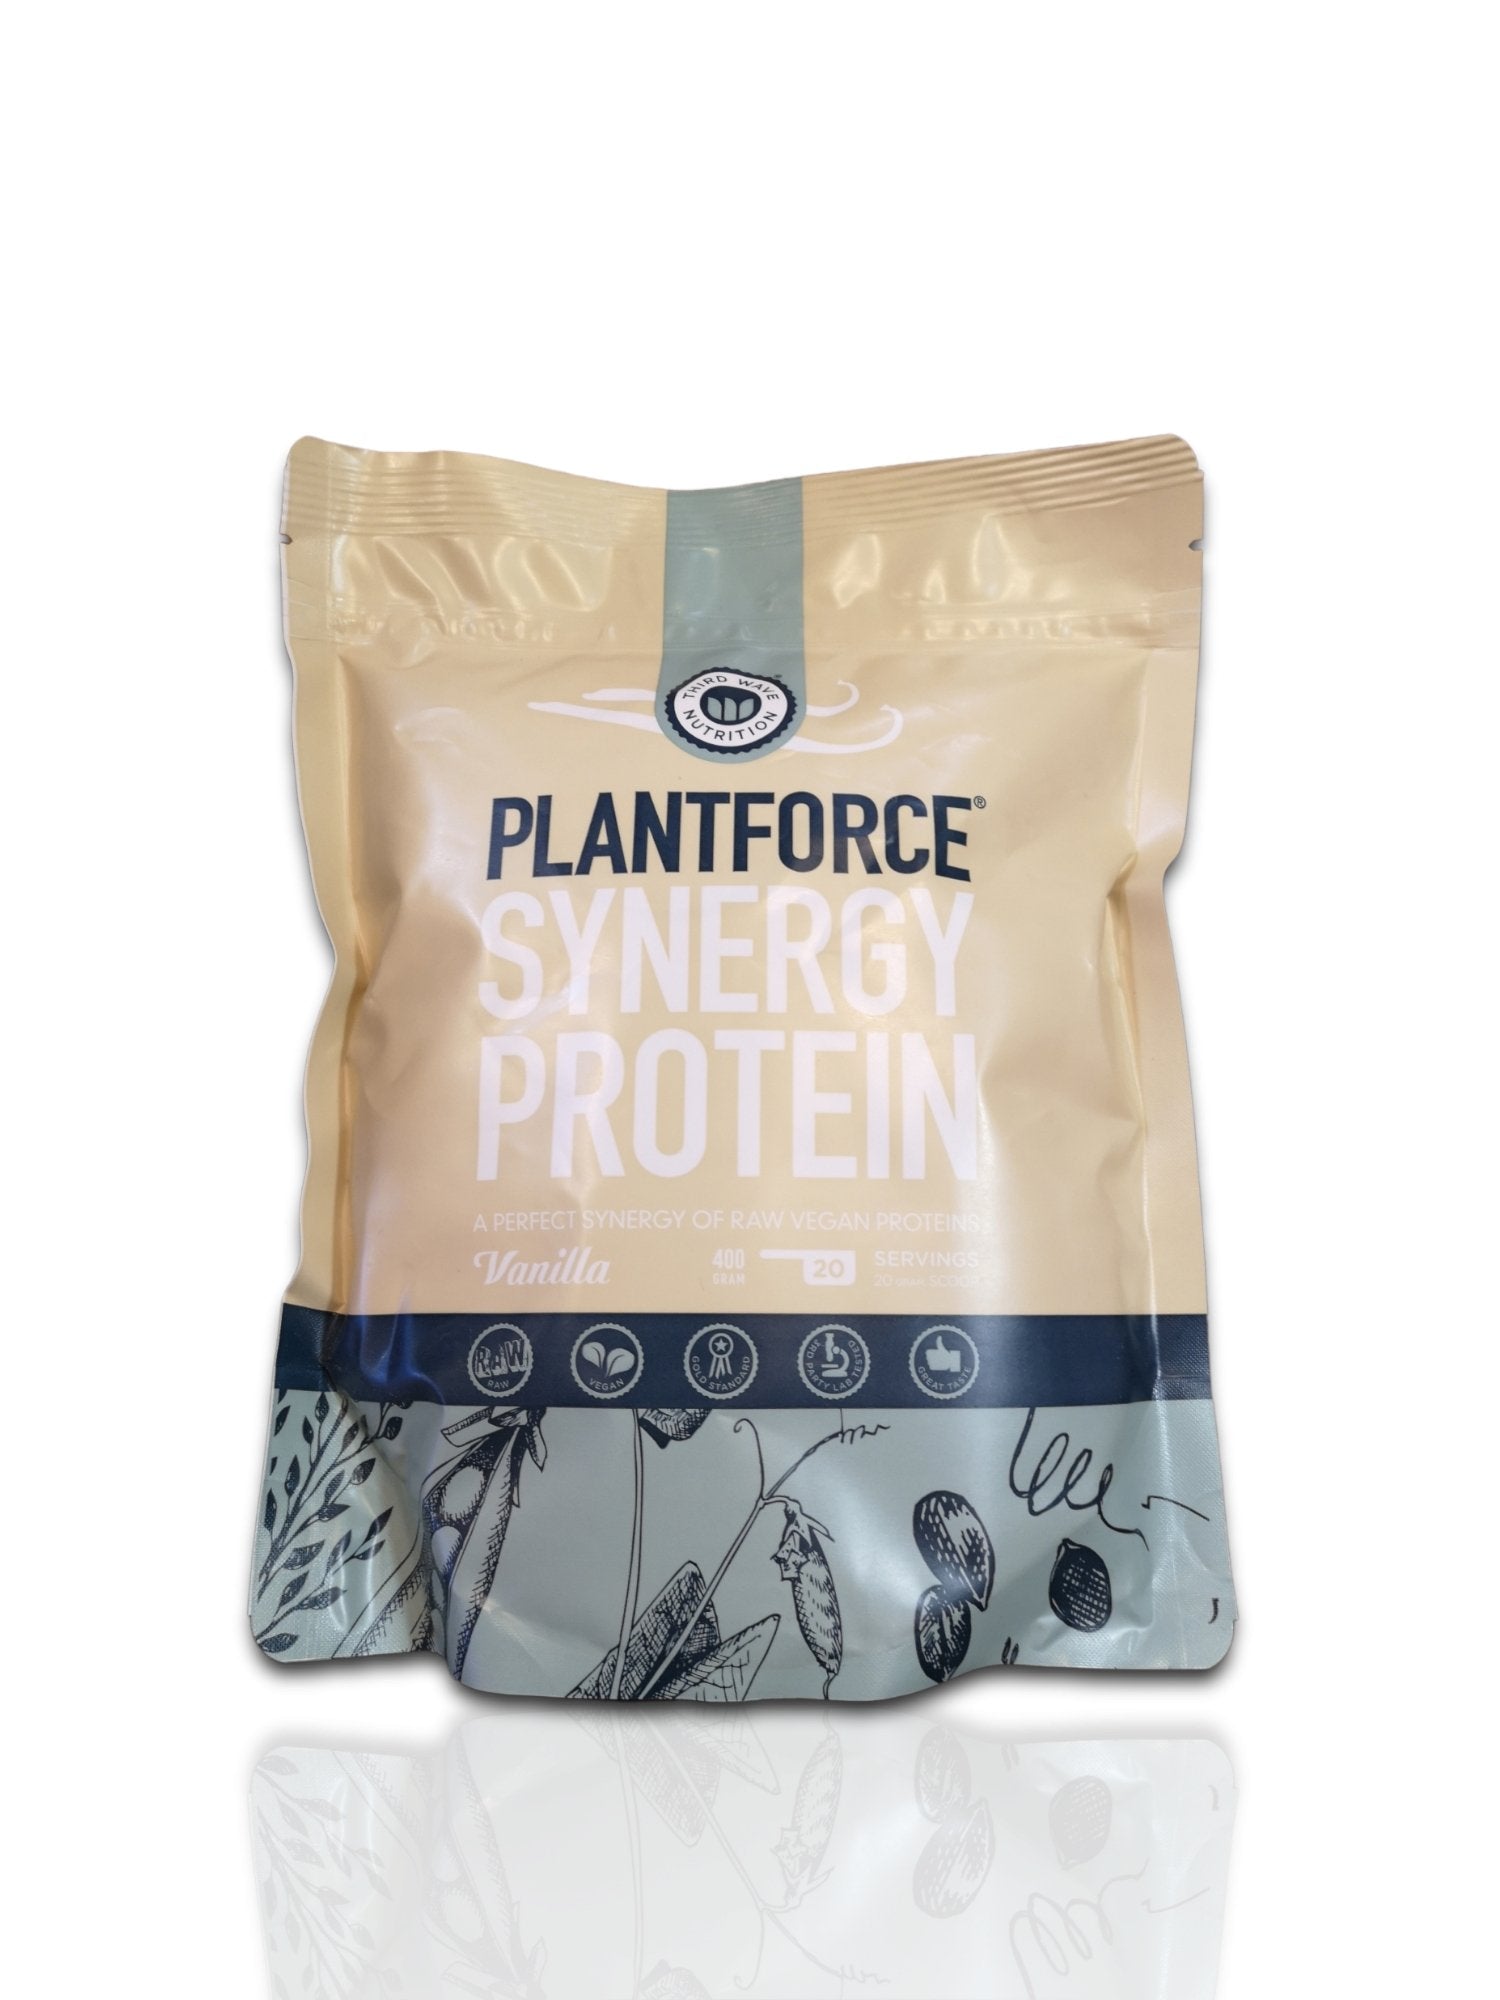 Plantforce Synergy Protein 400g - Healthy Living